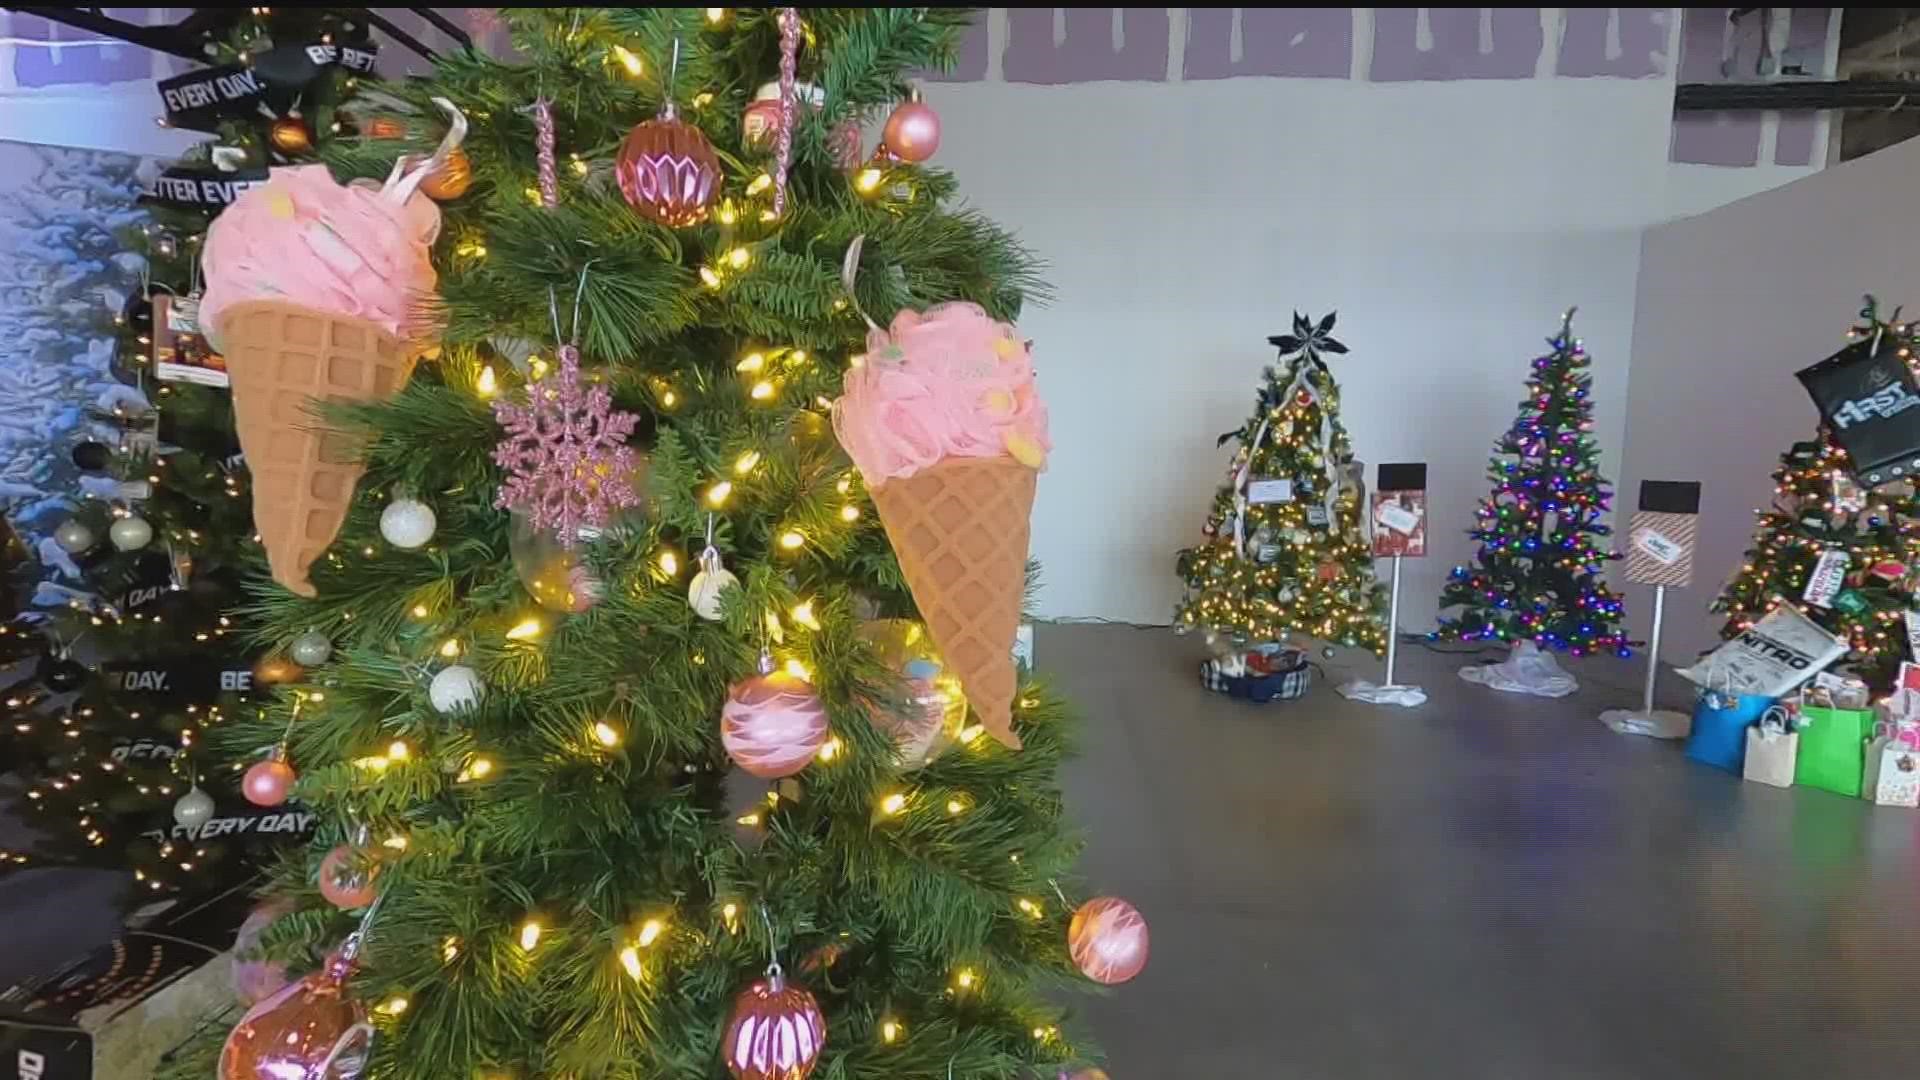 The festival kicked off Wednesday with an installation of 80 uniquely decorated Christmas trees.